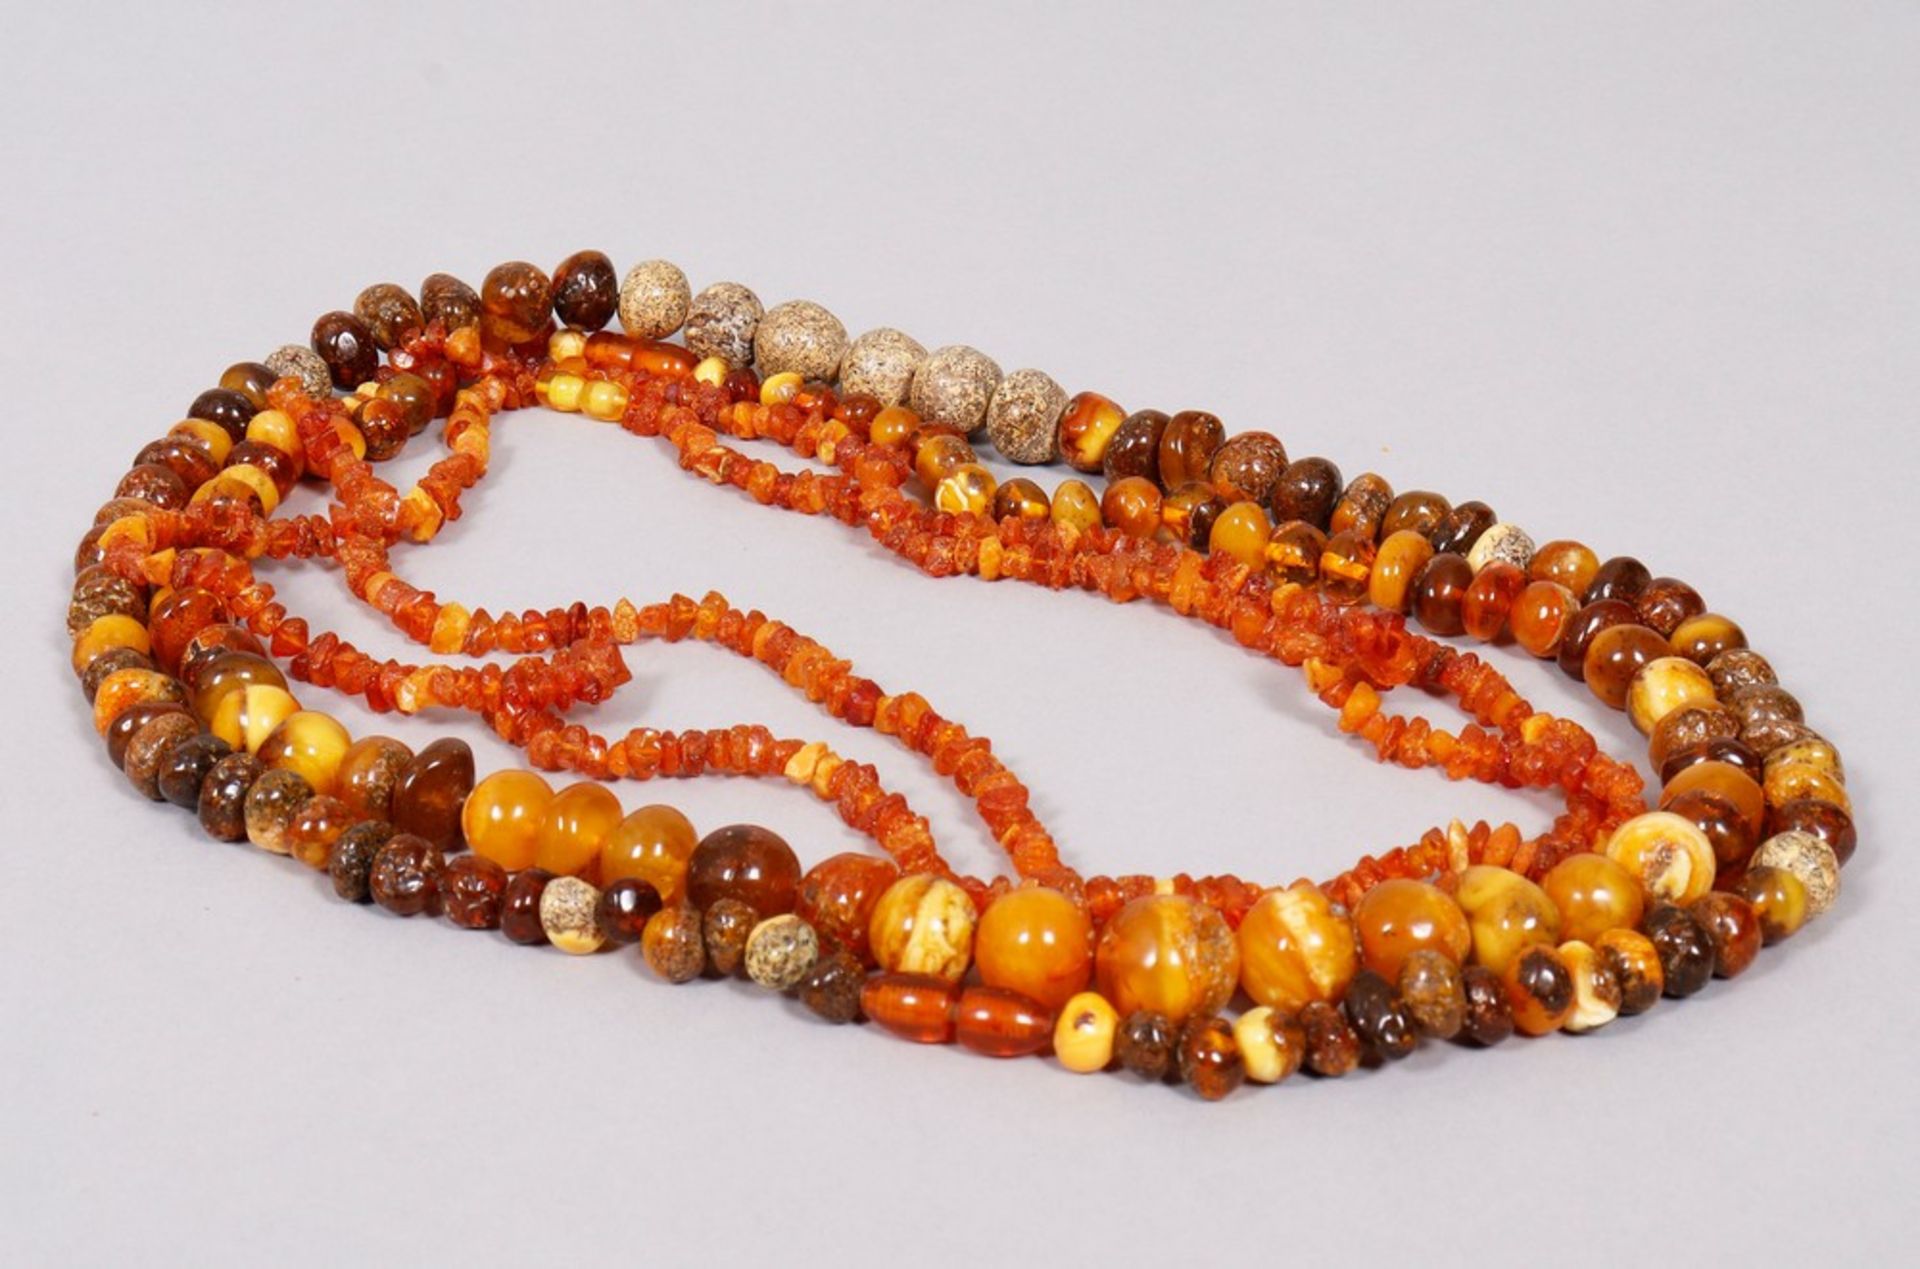 8 amber necklaces and 2 bracelets - Image 3 of 5